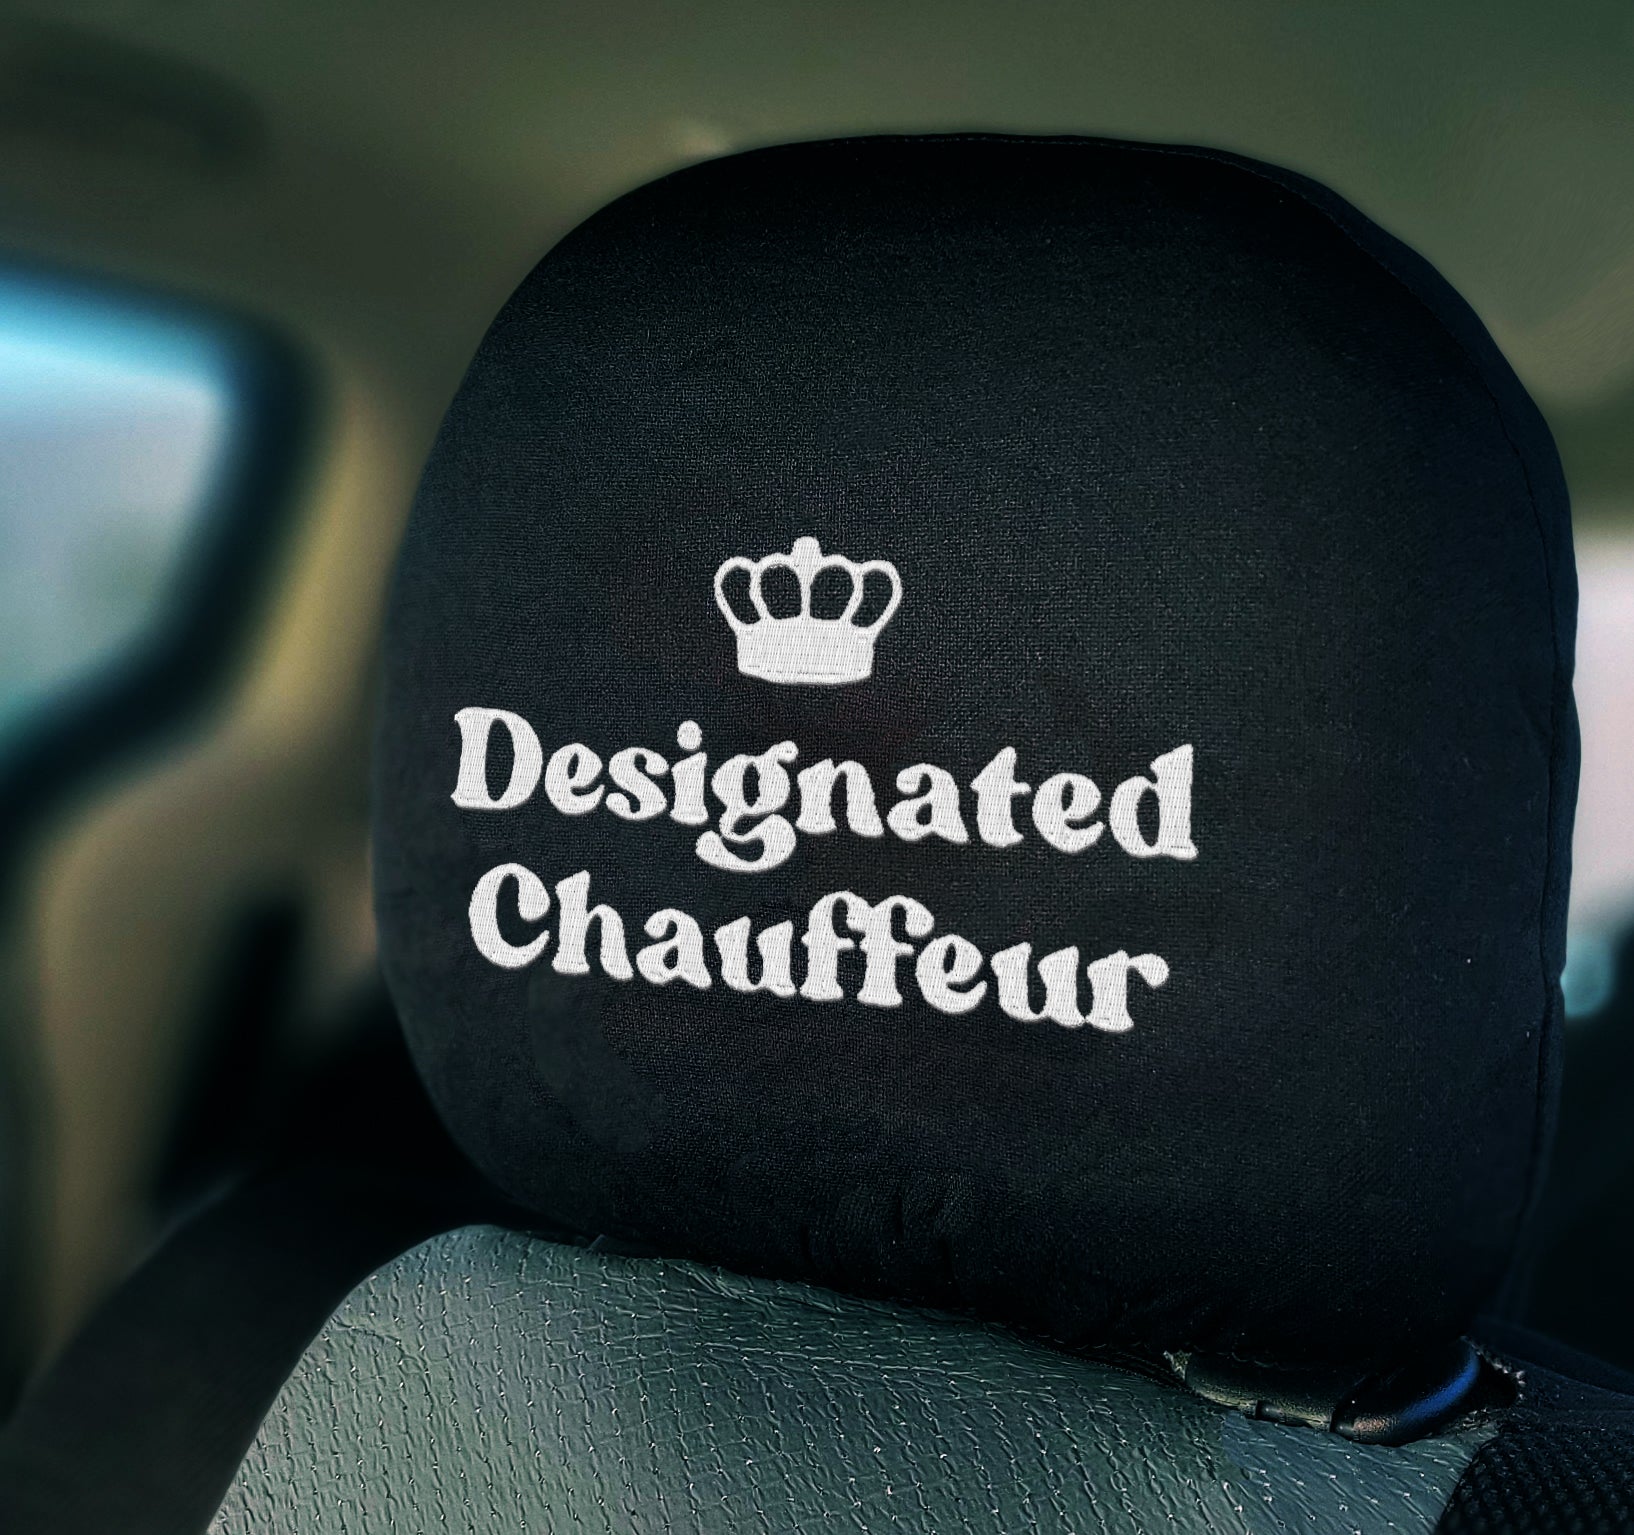 Pair of Embroidery Designate Chauffeur and Passenger Princess Design Car Truck Seat Headrest Covers - Yupbizauto